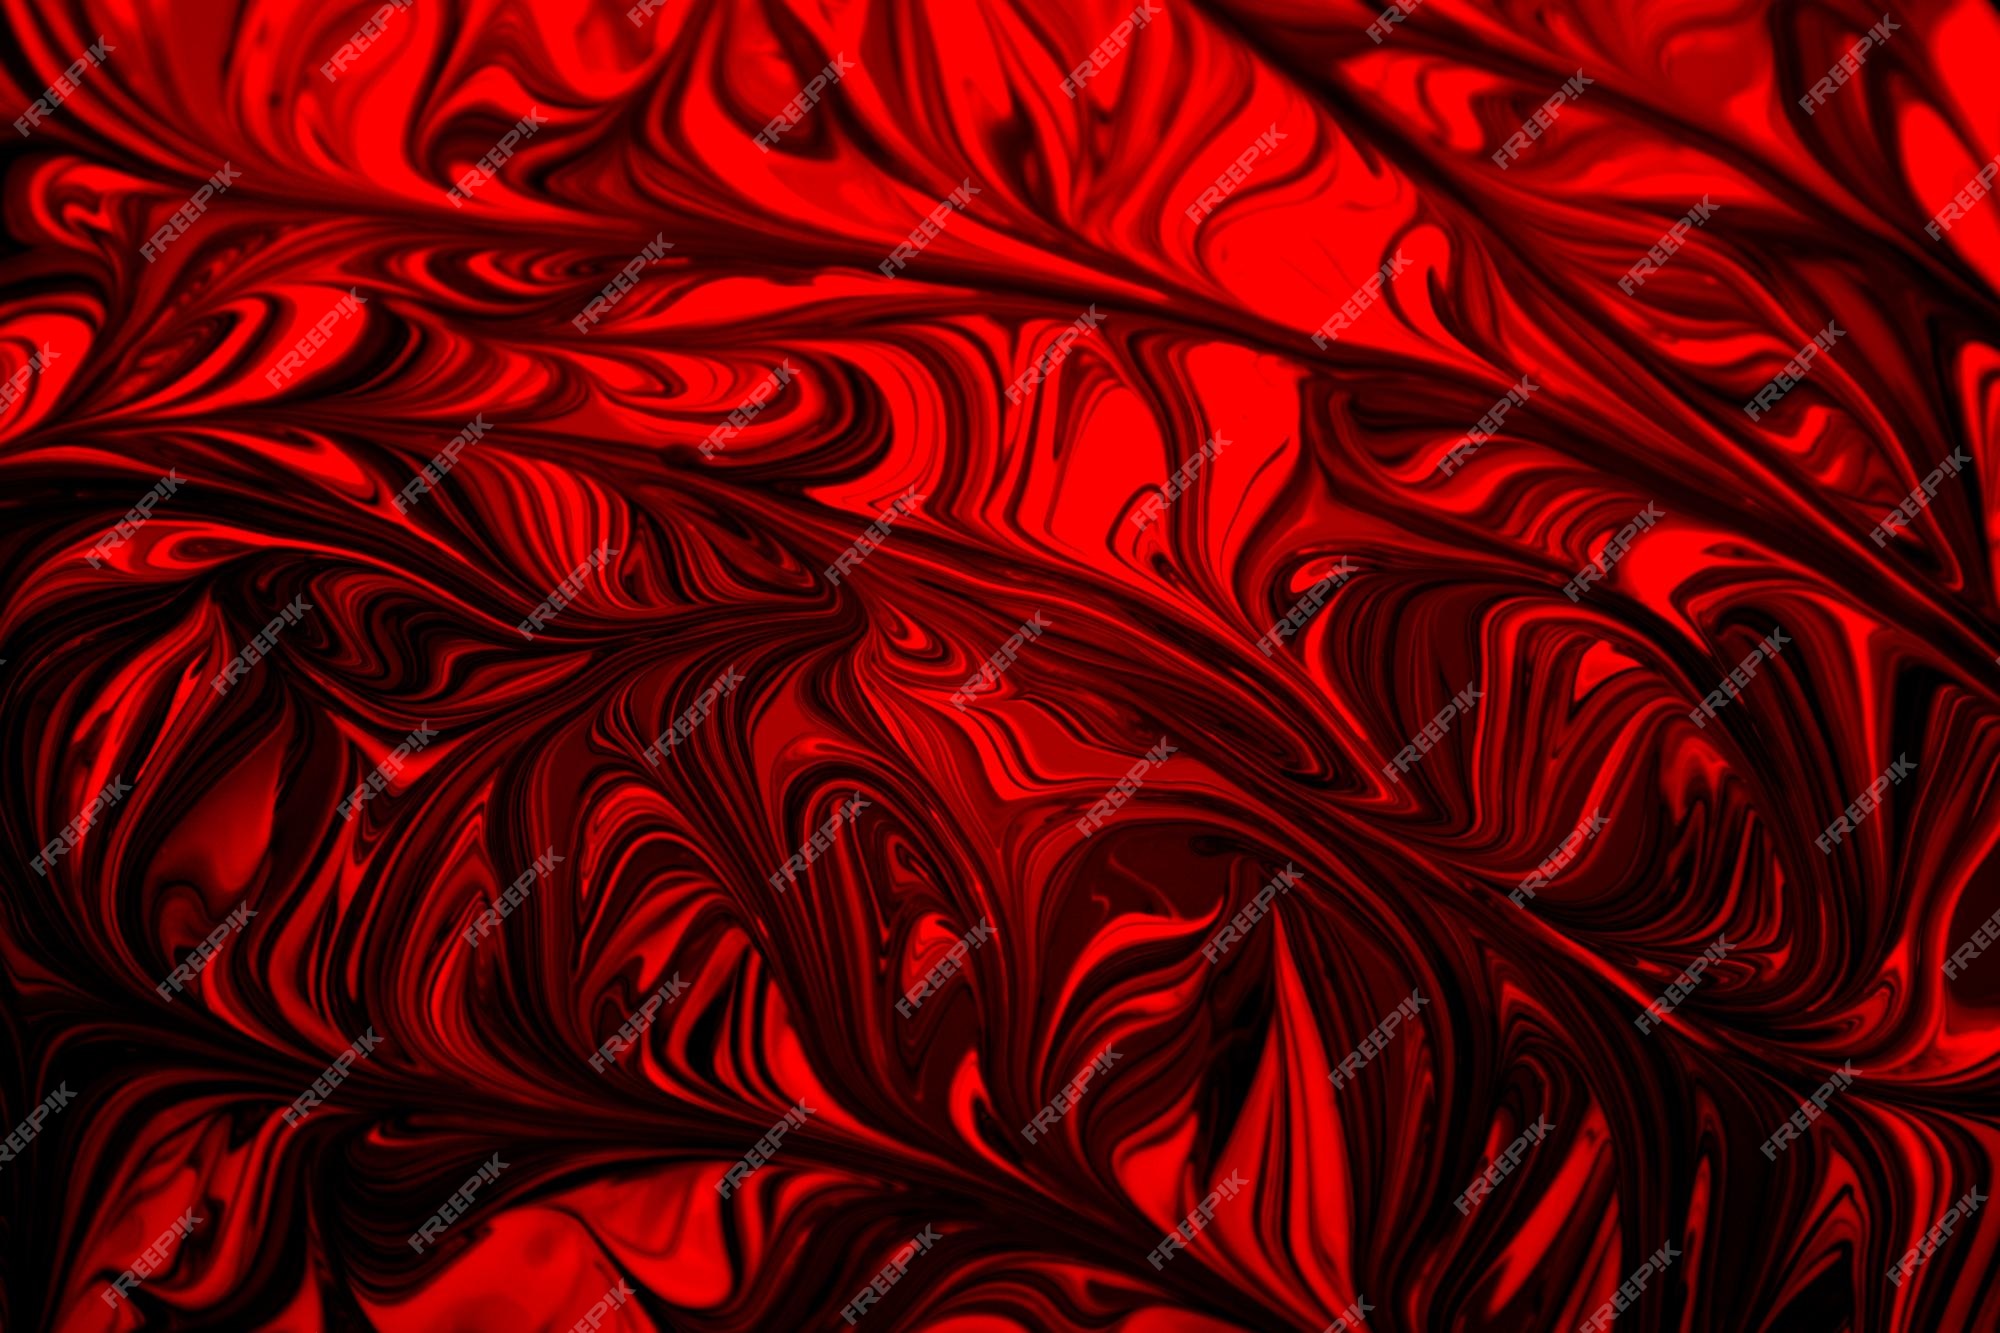 Premium Photo | Red and black liquid abstract background